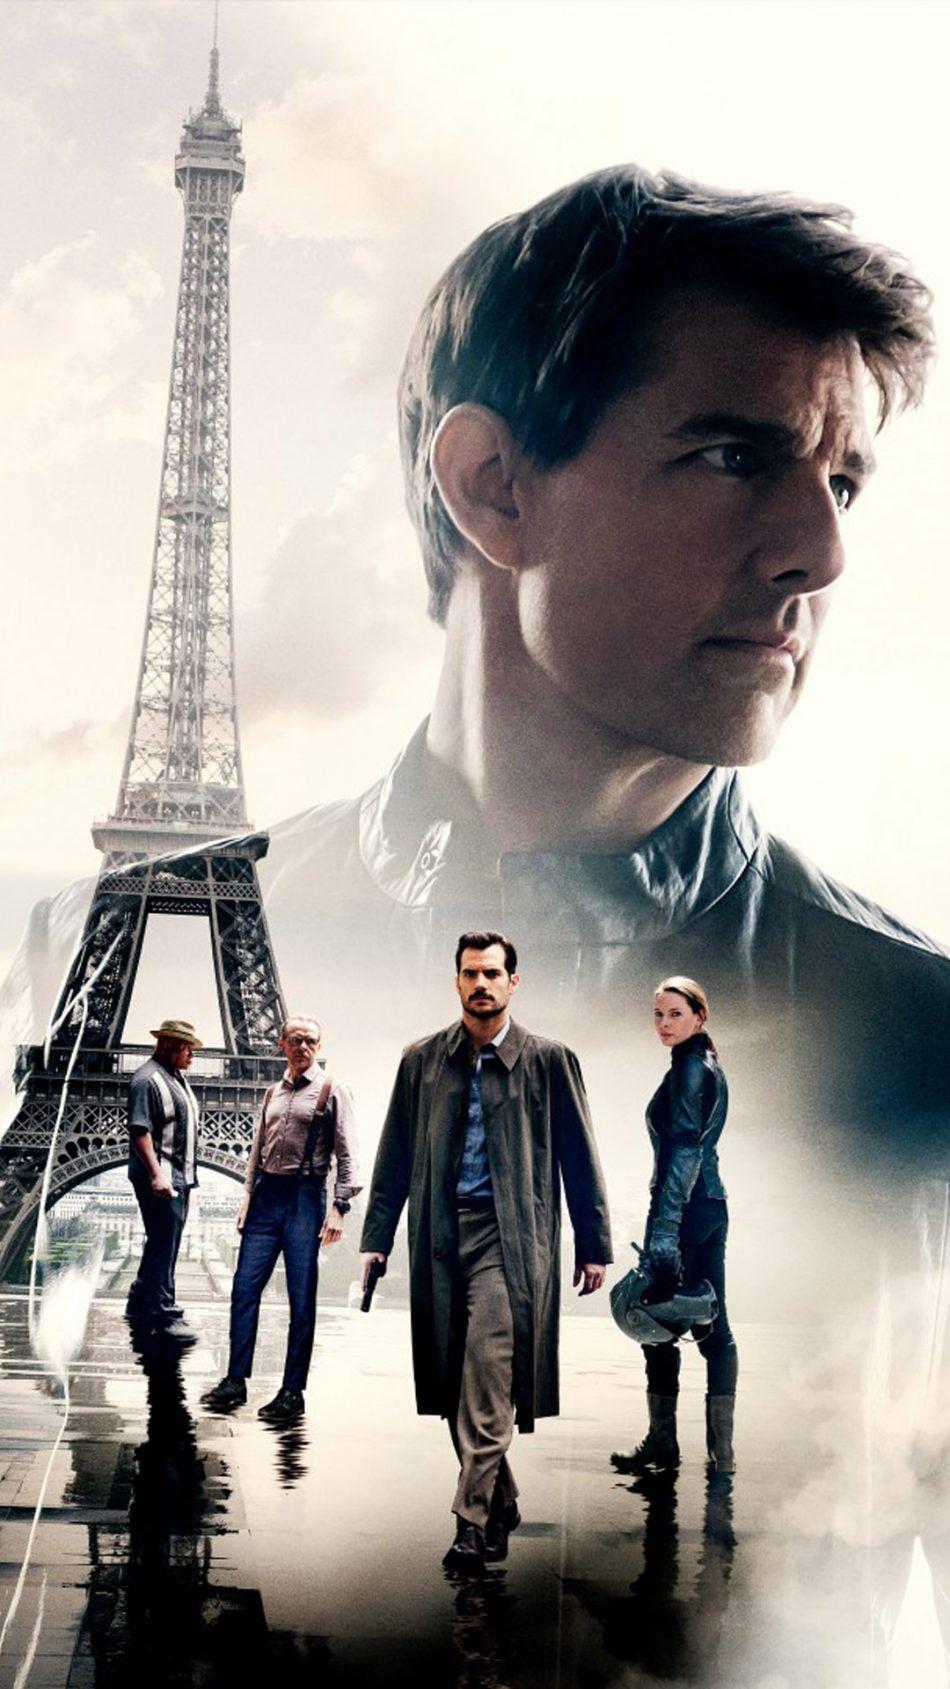 Mission Impossible Fallout Tom Cruise 2018